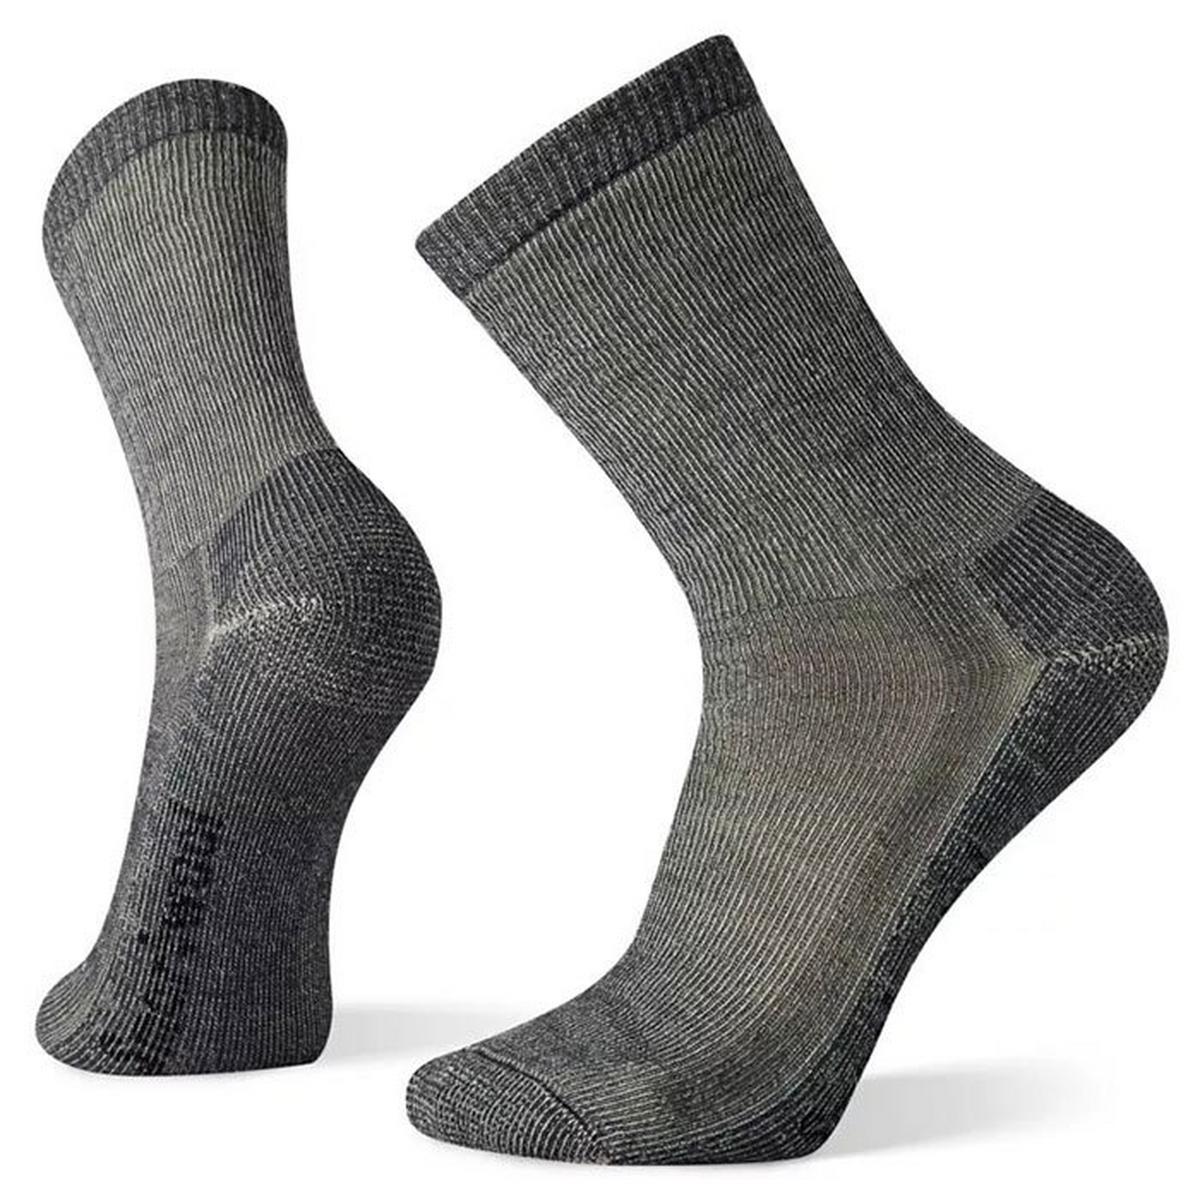 Chaussettes mi-mollet Hike Classic Edition Full Cushion pour hommes